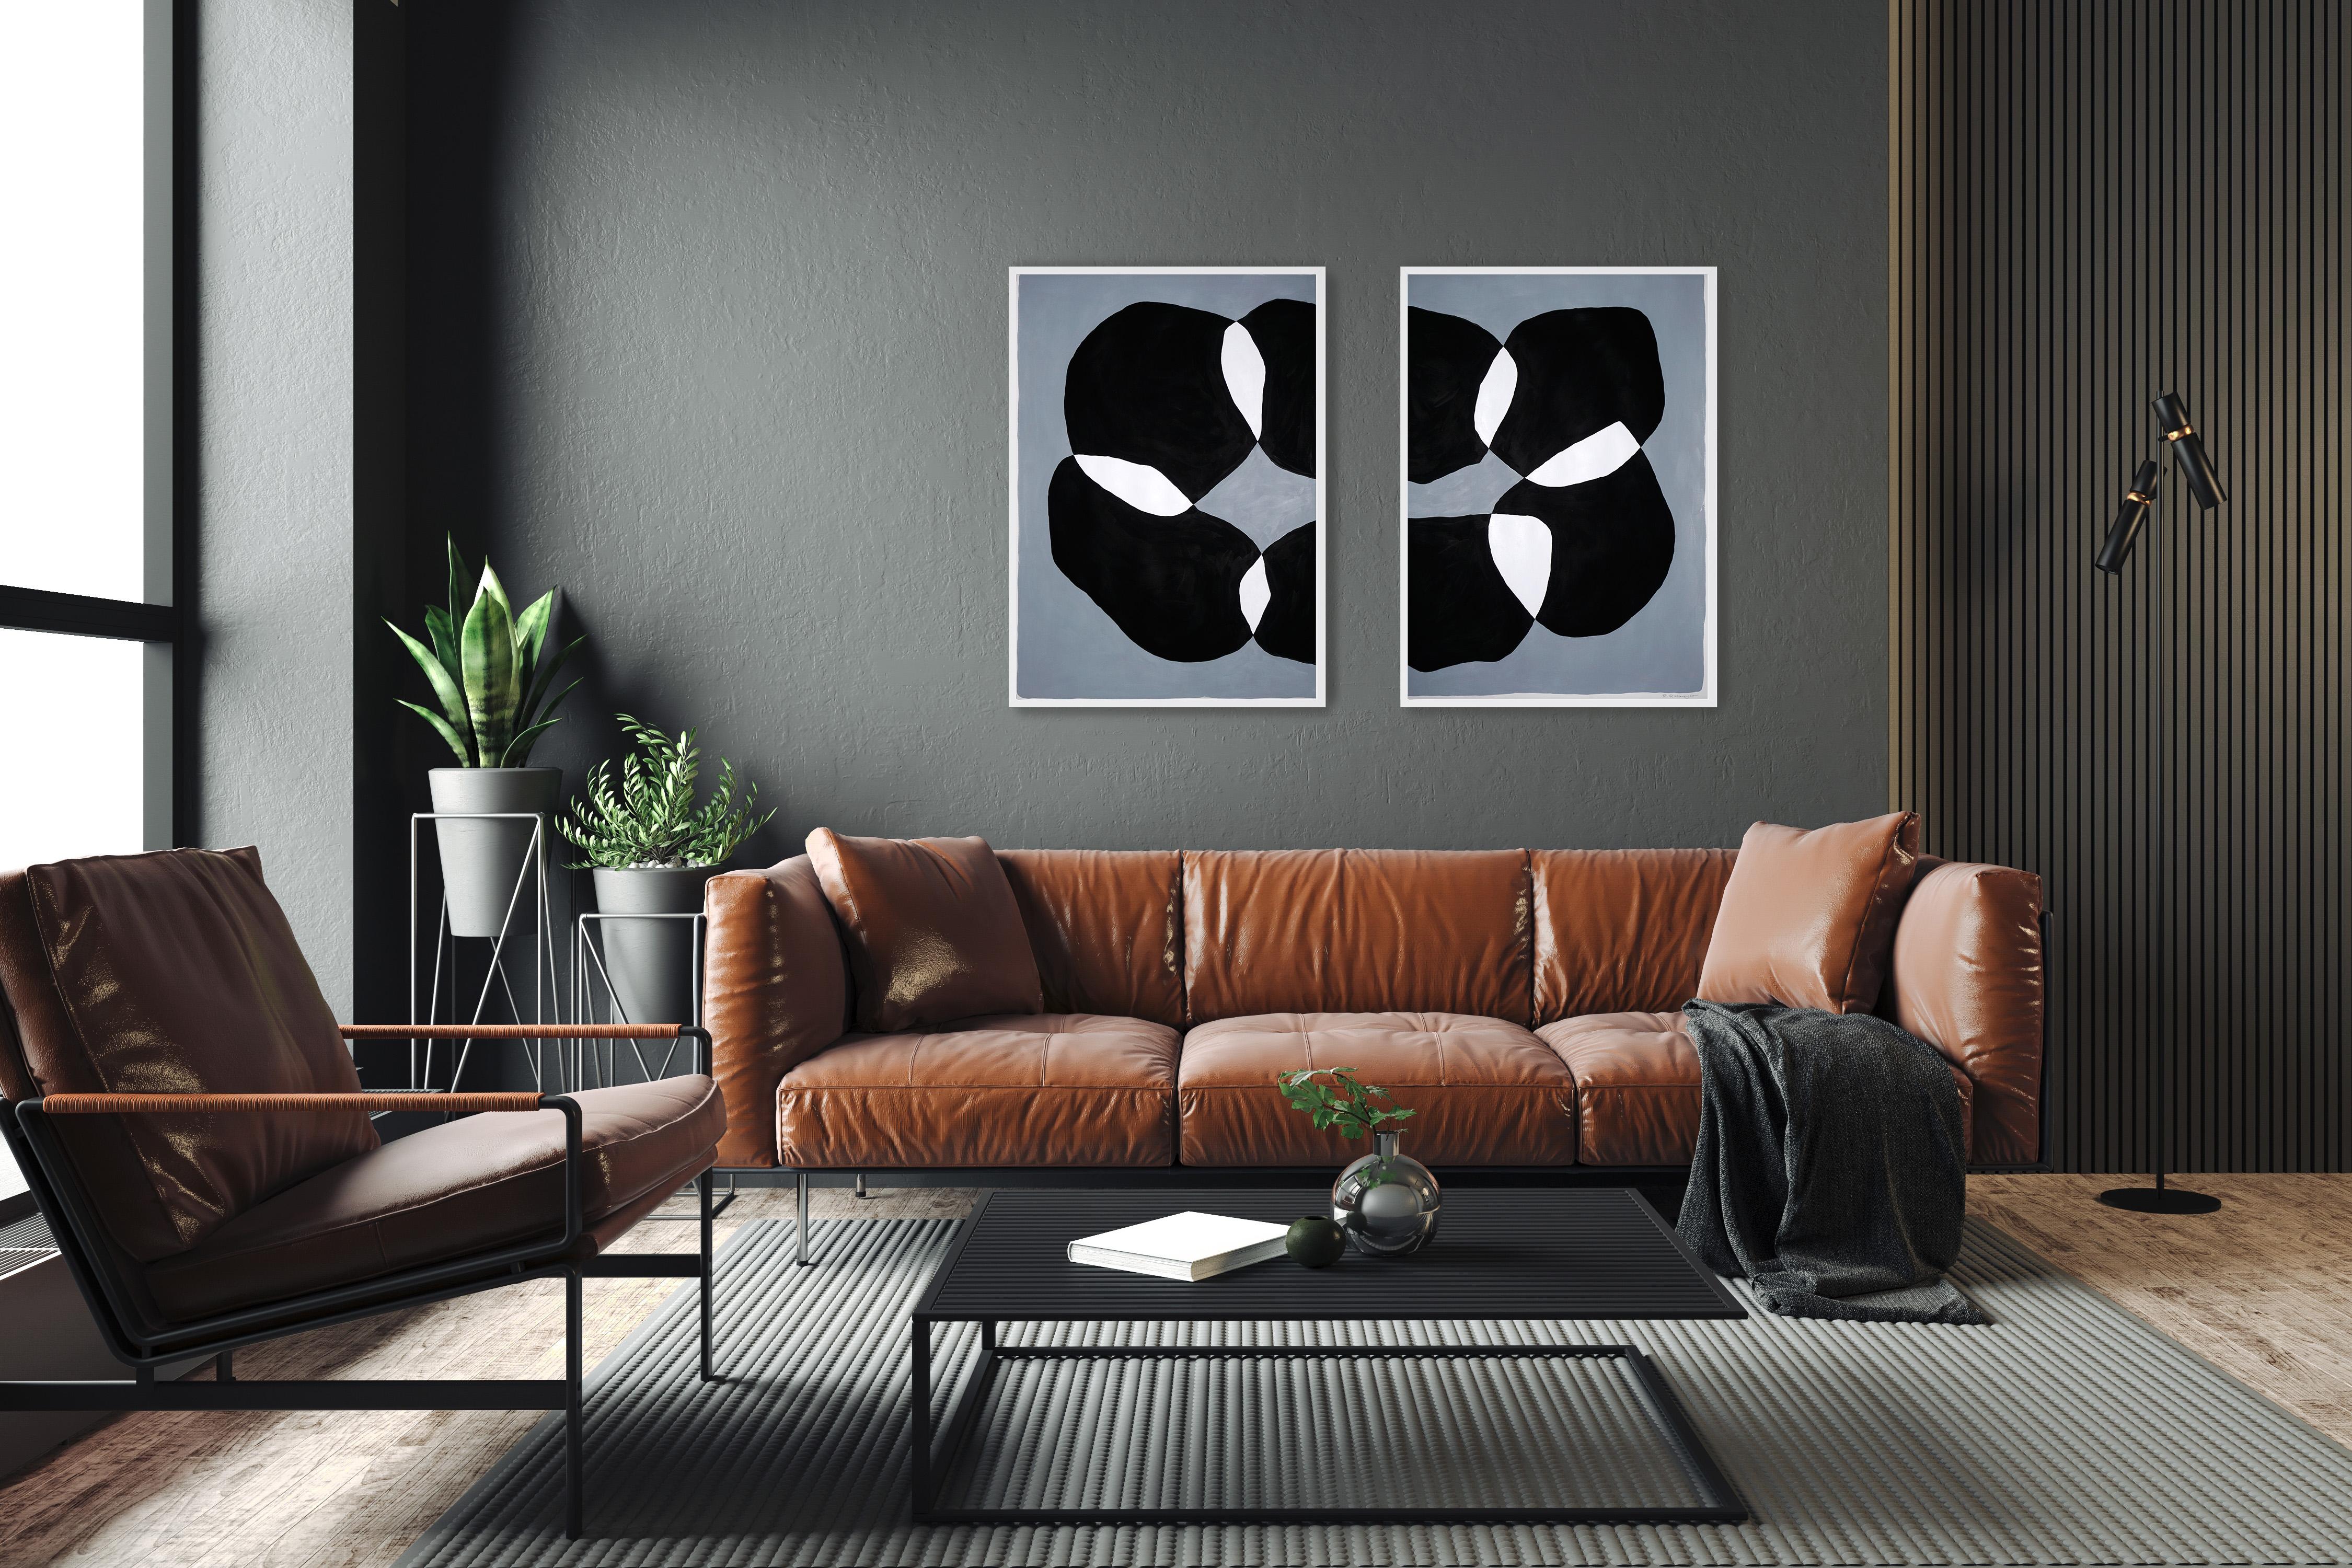 Shadow Stones, Black and White Large Diptych, Abstract Bold Patterns on Paper - Painting by Ryan Rivadeneyra